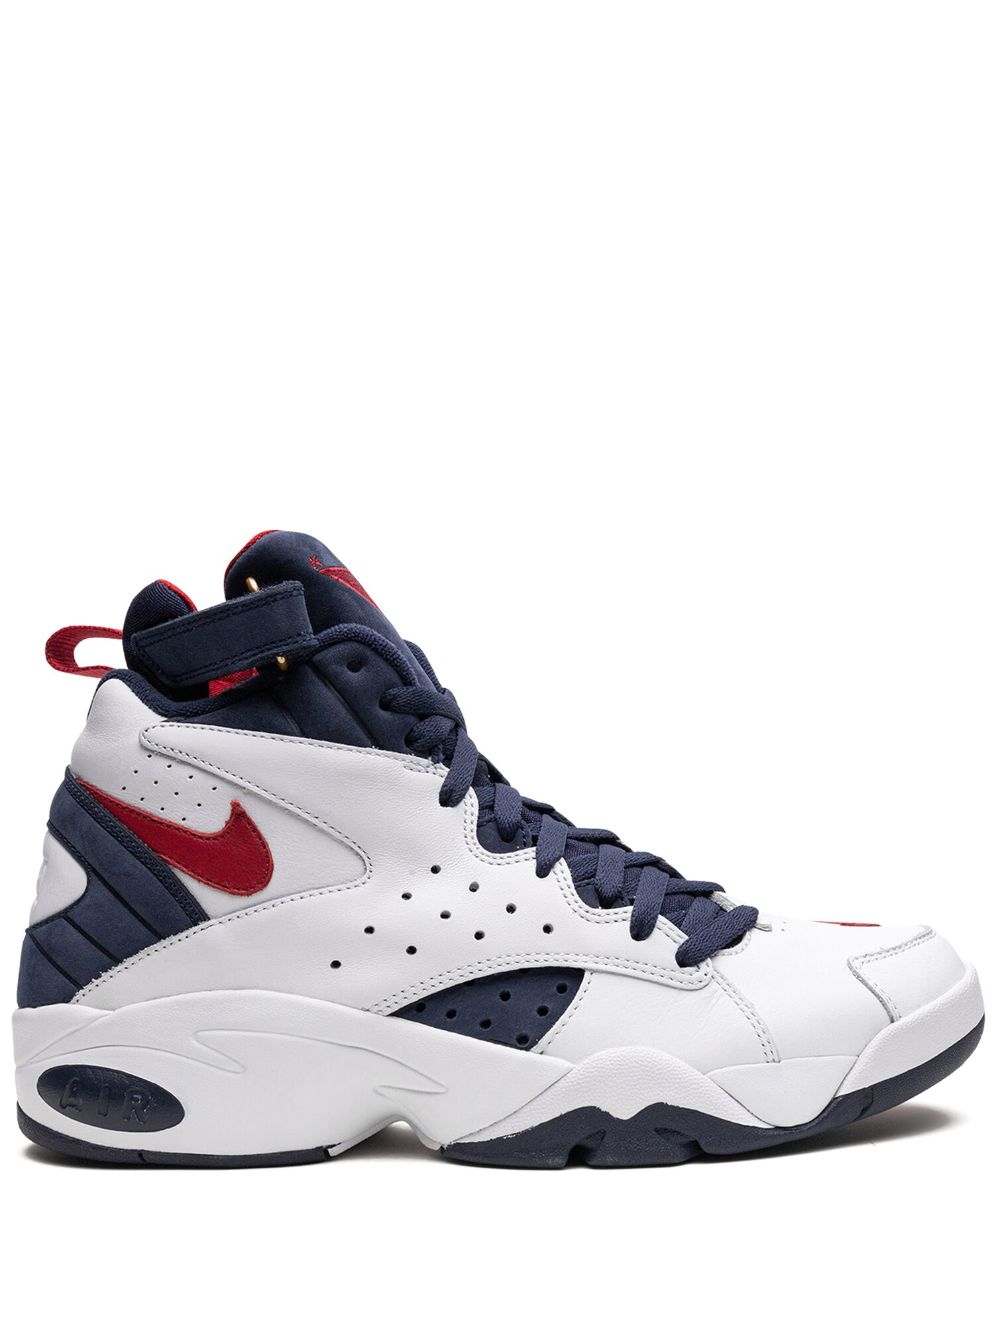 Nike X Kith Air Maestro 2 High Sneakers In White